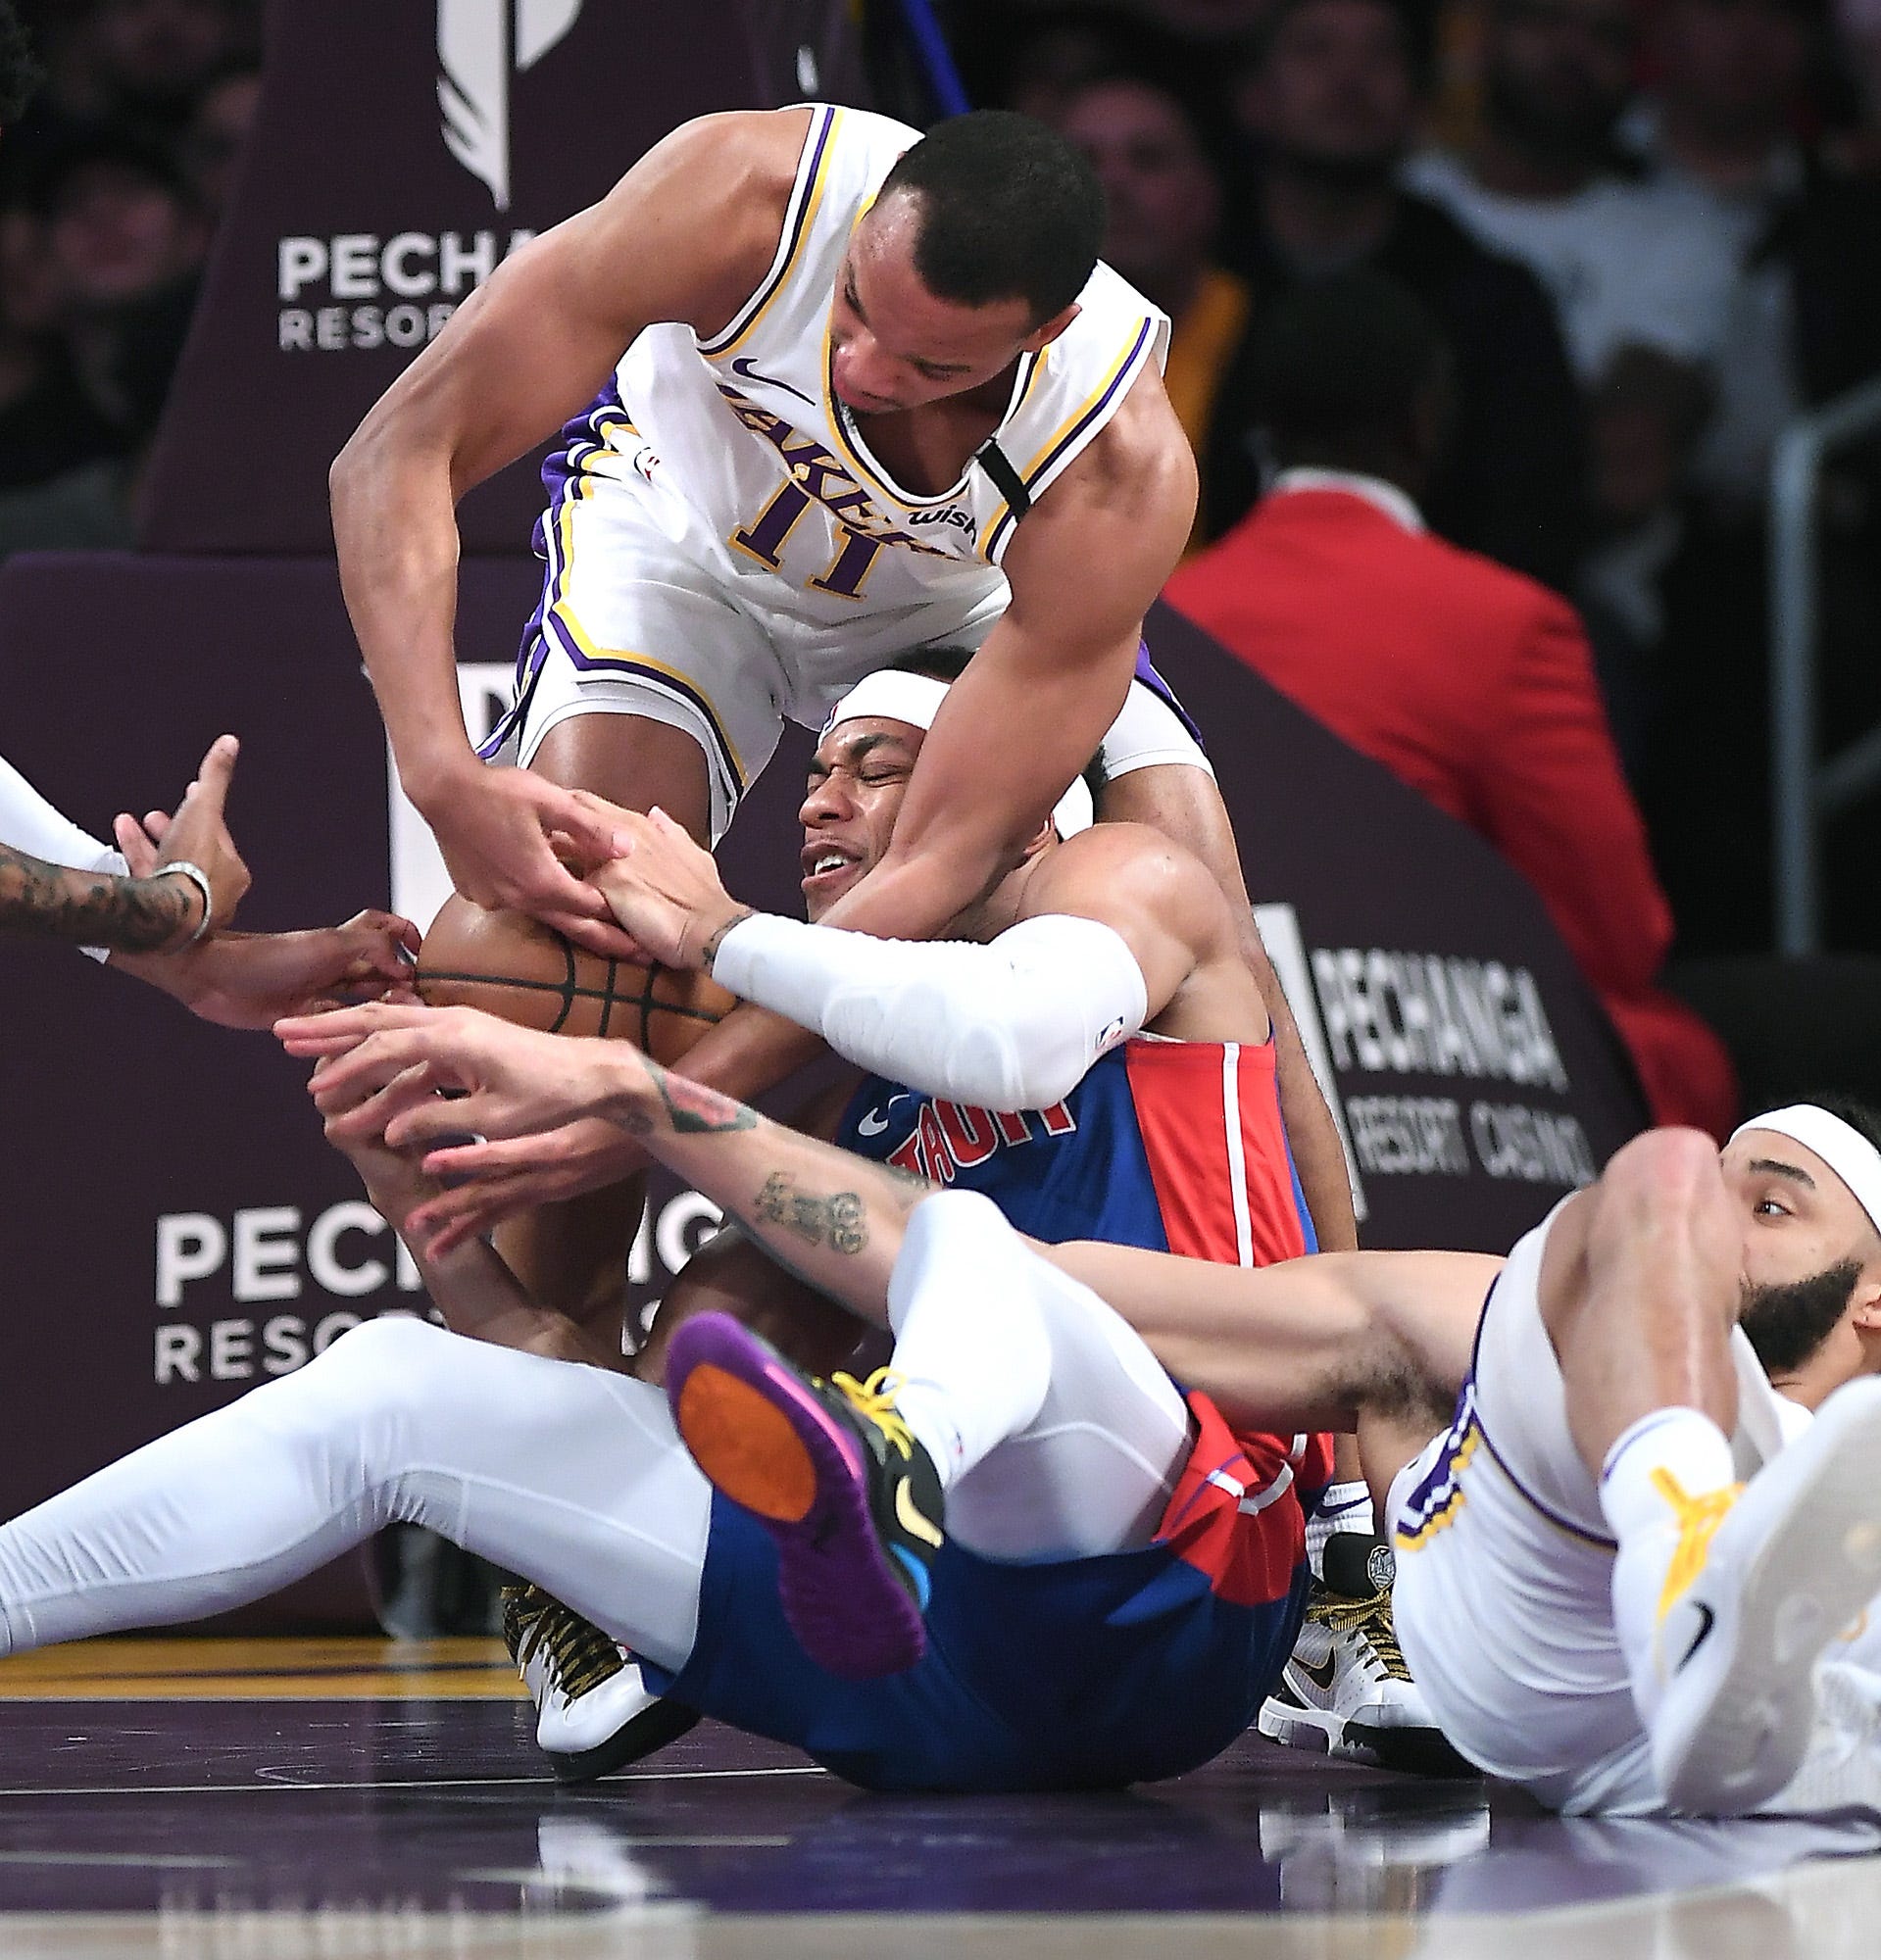 Los Angeles Lakers' Avery Bradley (11) fouls Detroit Pistons' Bruce Brown as JaVale McGee tries to help on defense as they battle for a loose ball in the second quarter.